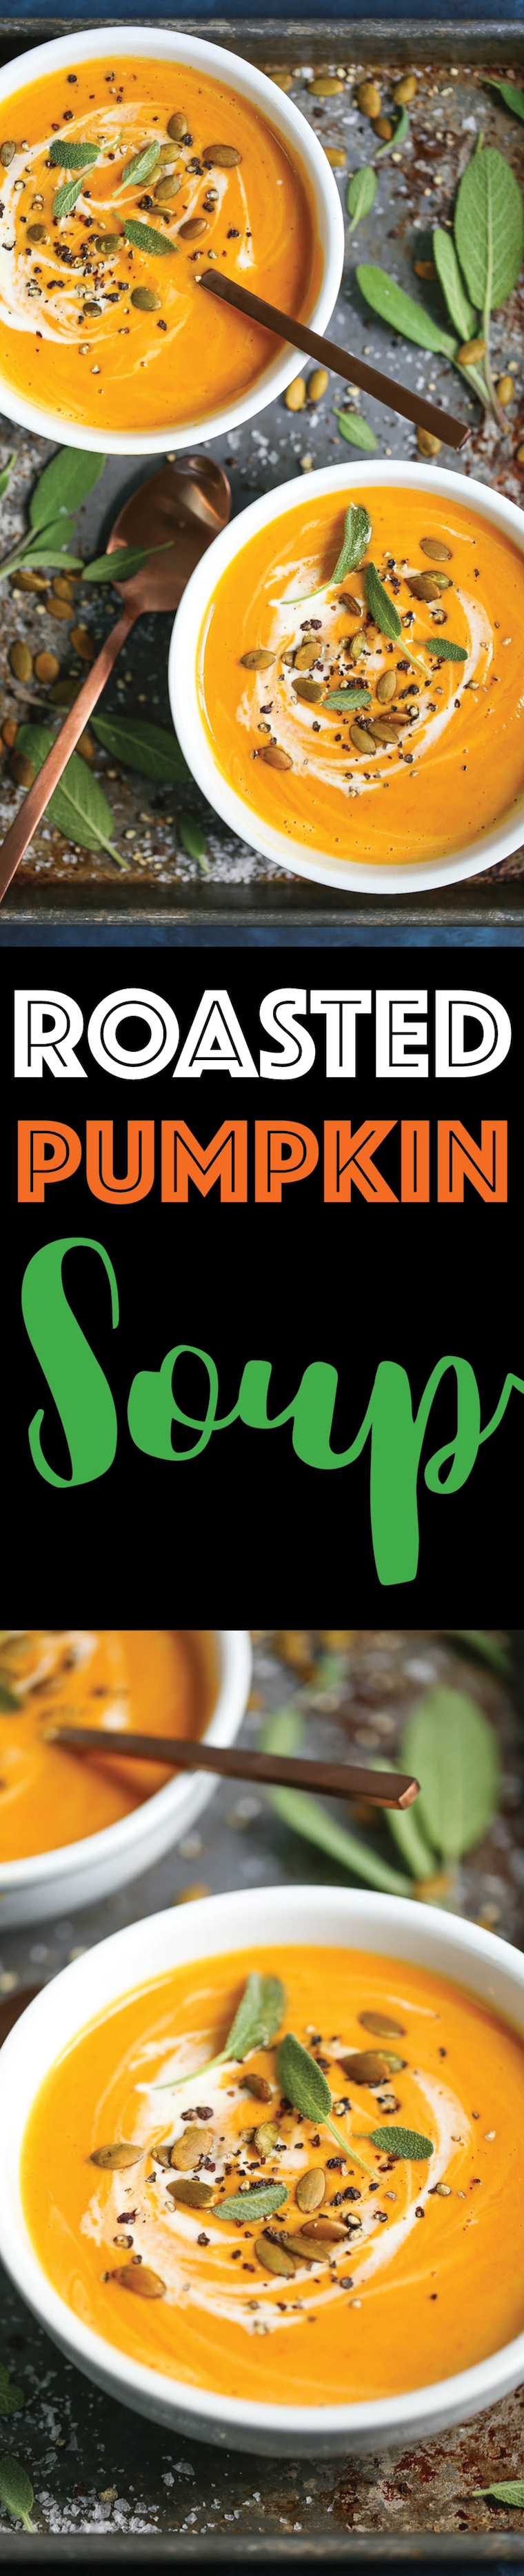 Roasted Pumpkin Soup - My favorite Fall and Winter soup! You’ll really want it all year long. And you can also substitute the pumpkin with butternut squash!